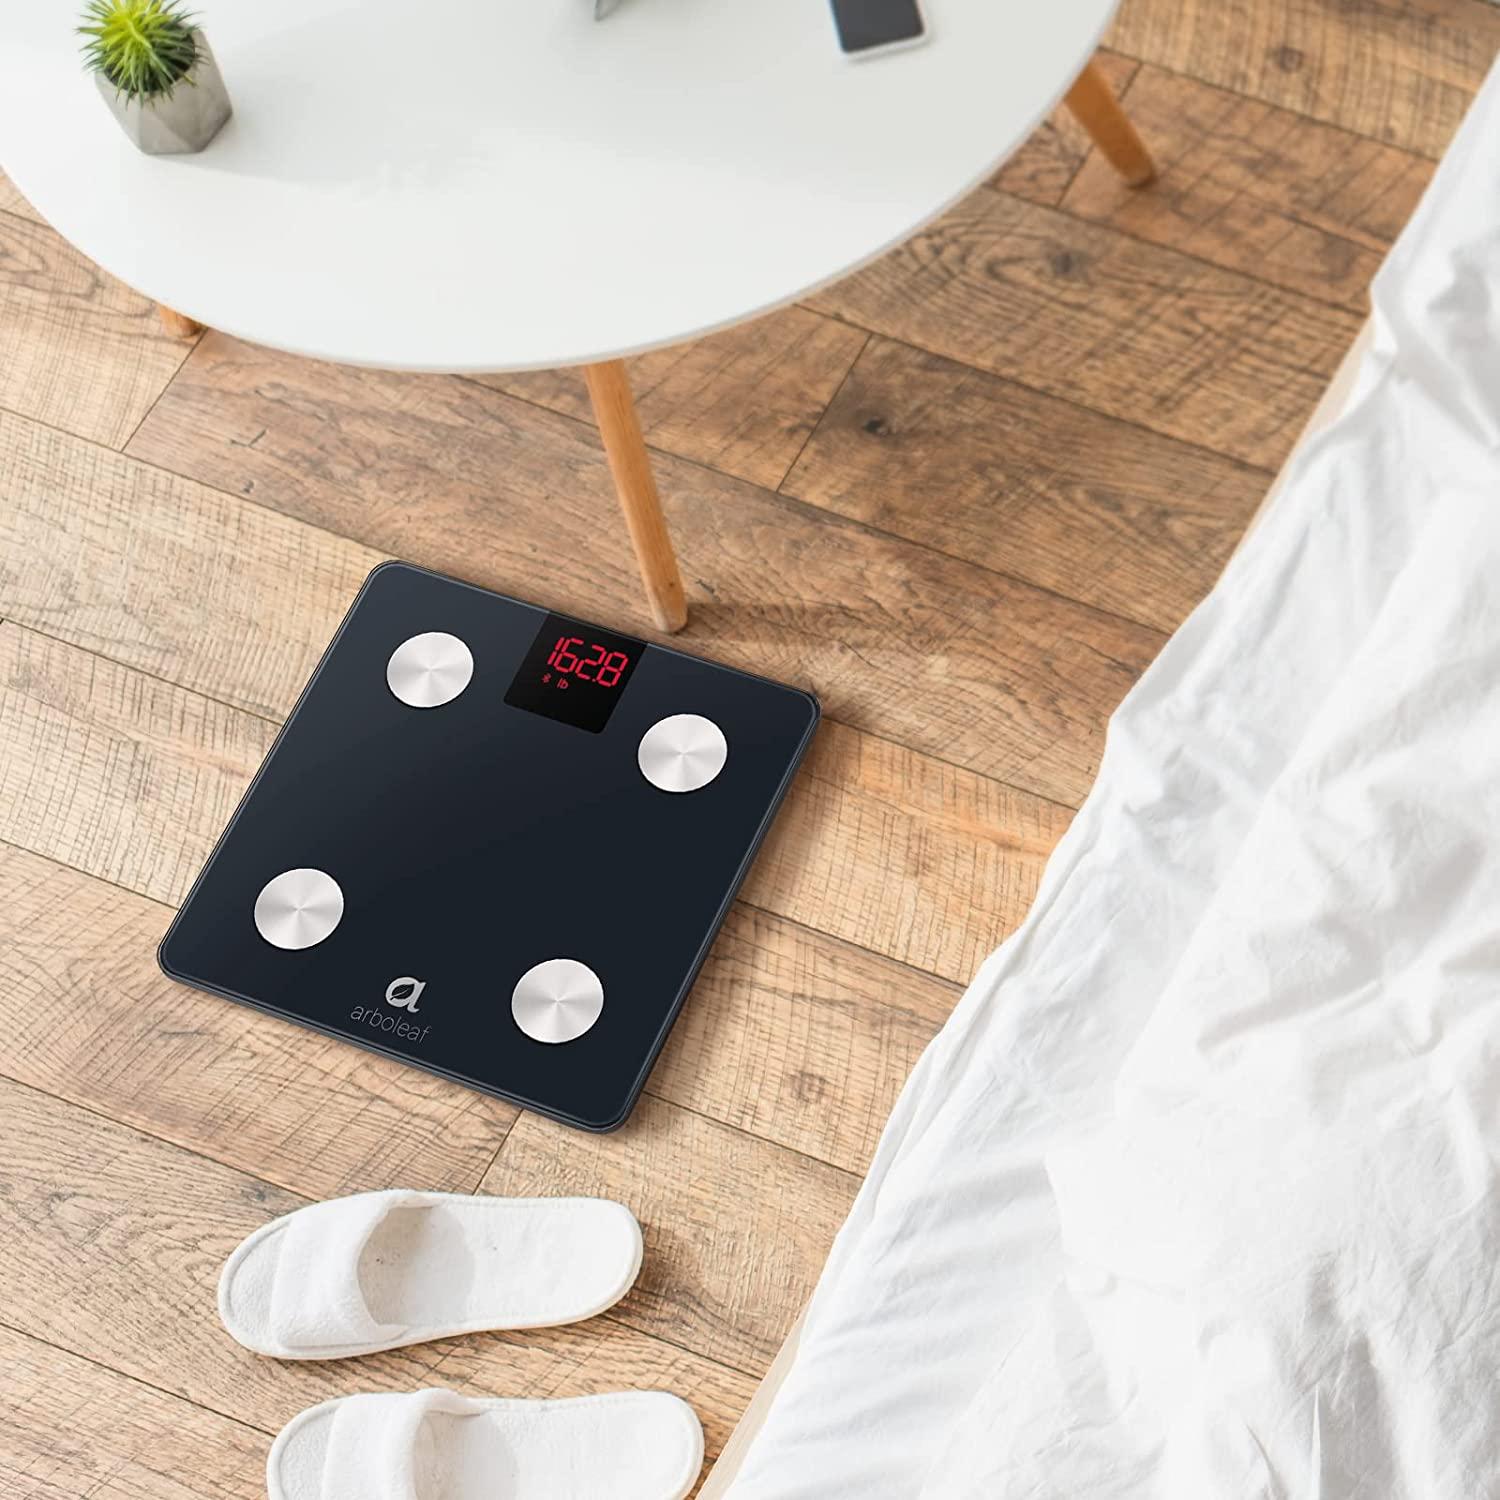 arboleaf Scales for Body Weight and Fat, Weight Scale with Body